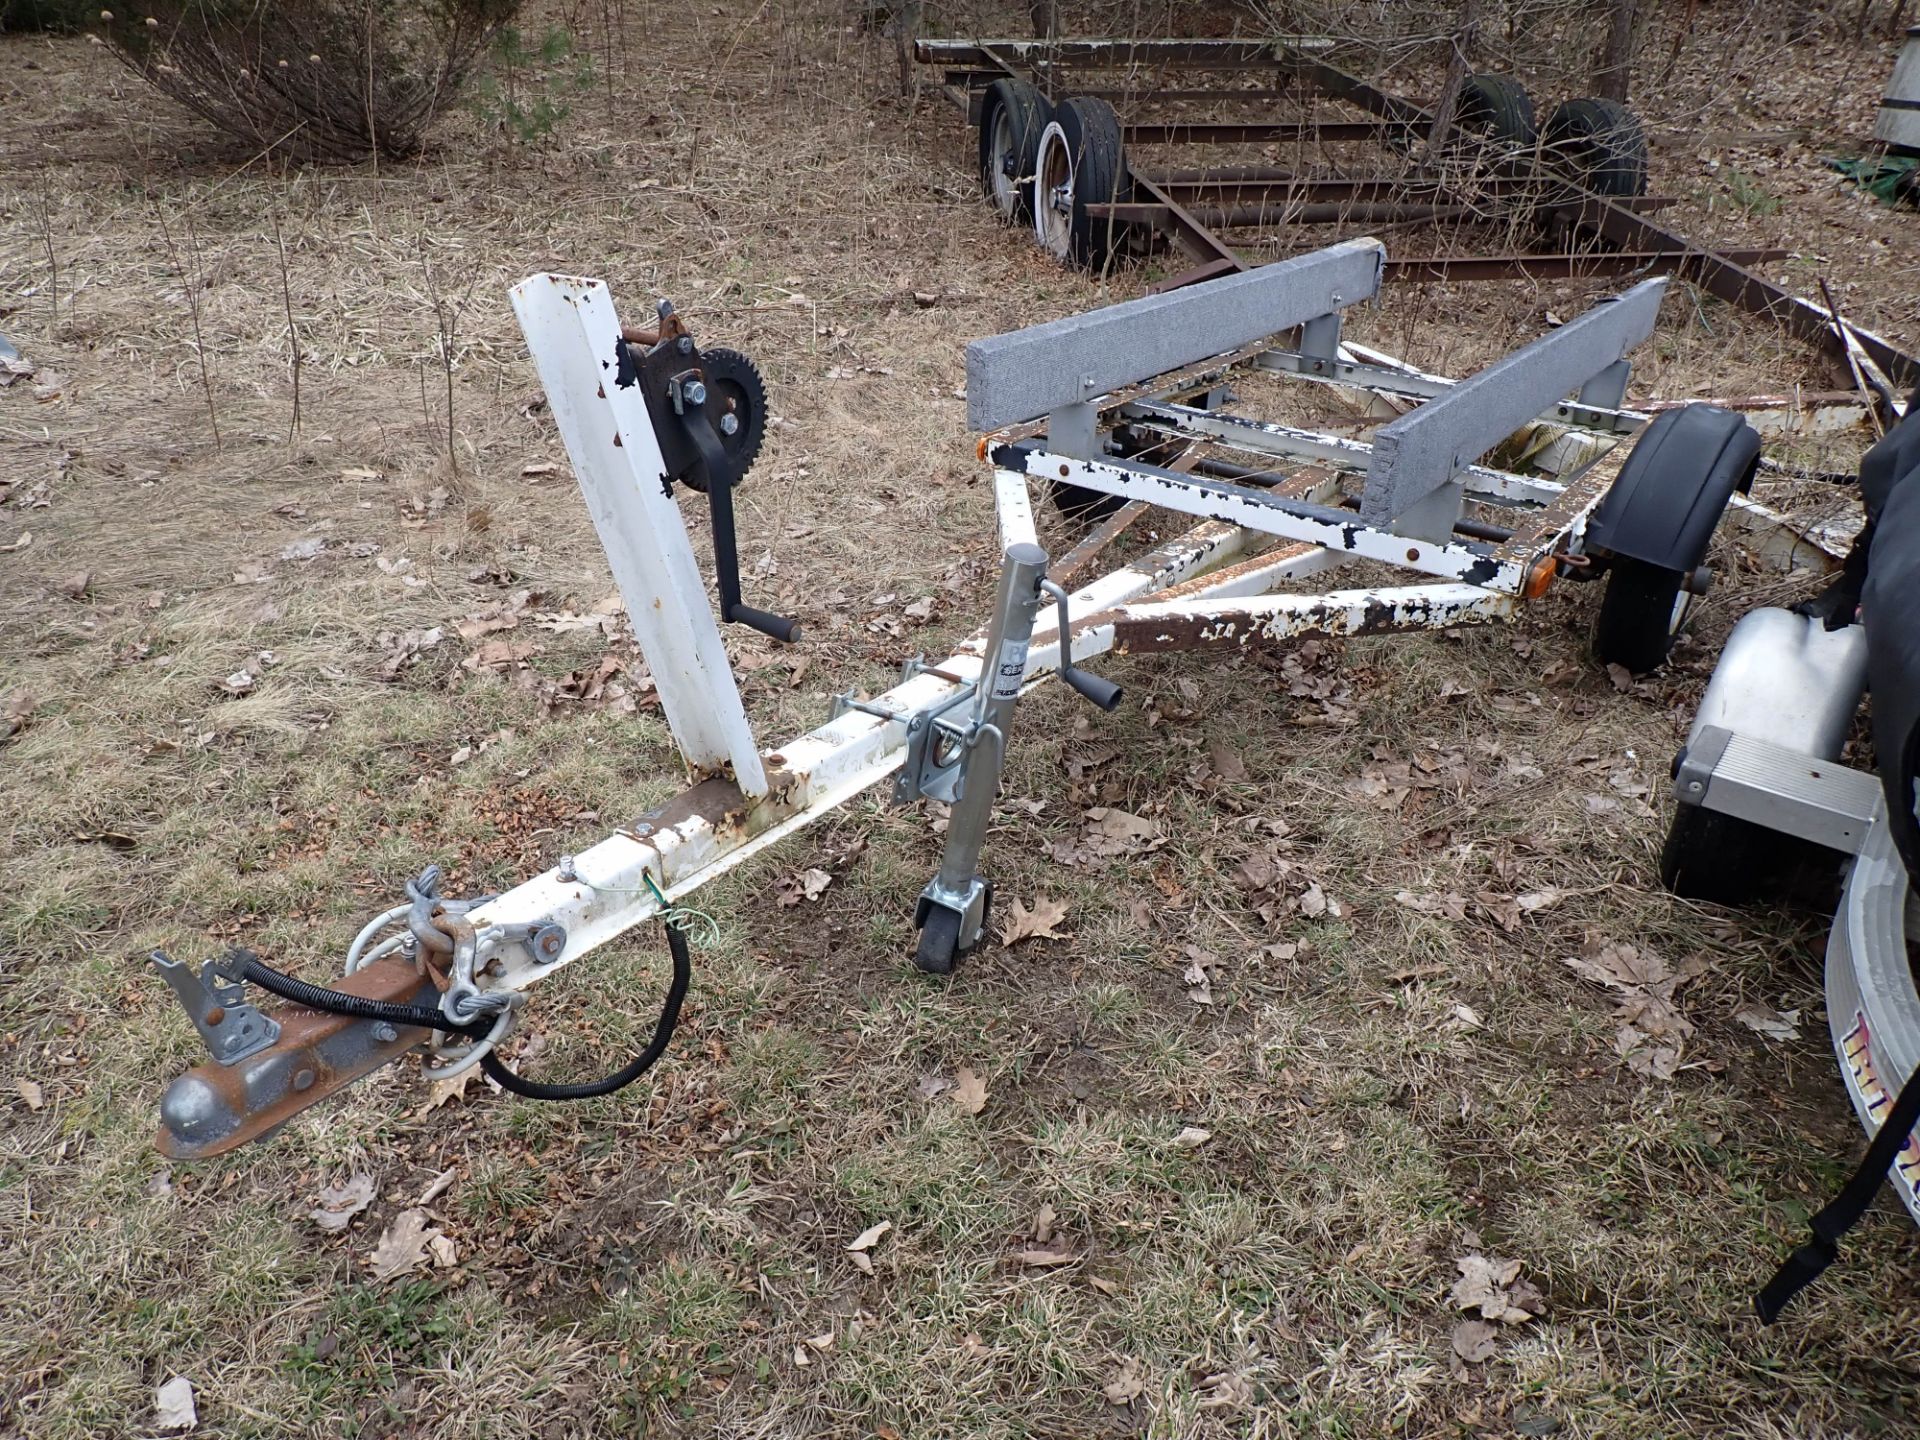 WHITE STEEL SINGLE AXLE 8.5'L BOAT TRAILER (CUSTOM TRAILER, NO OWNERSHIP AVAILABLE)